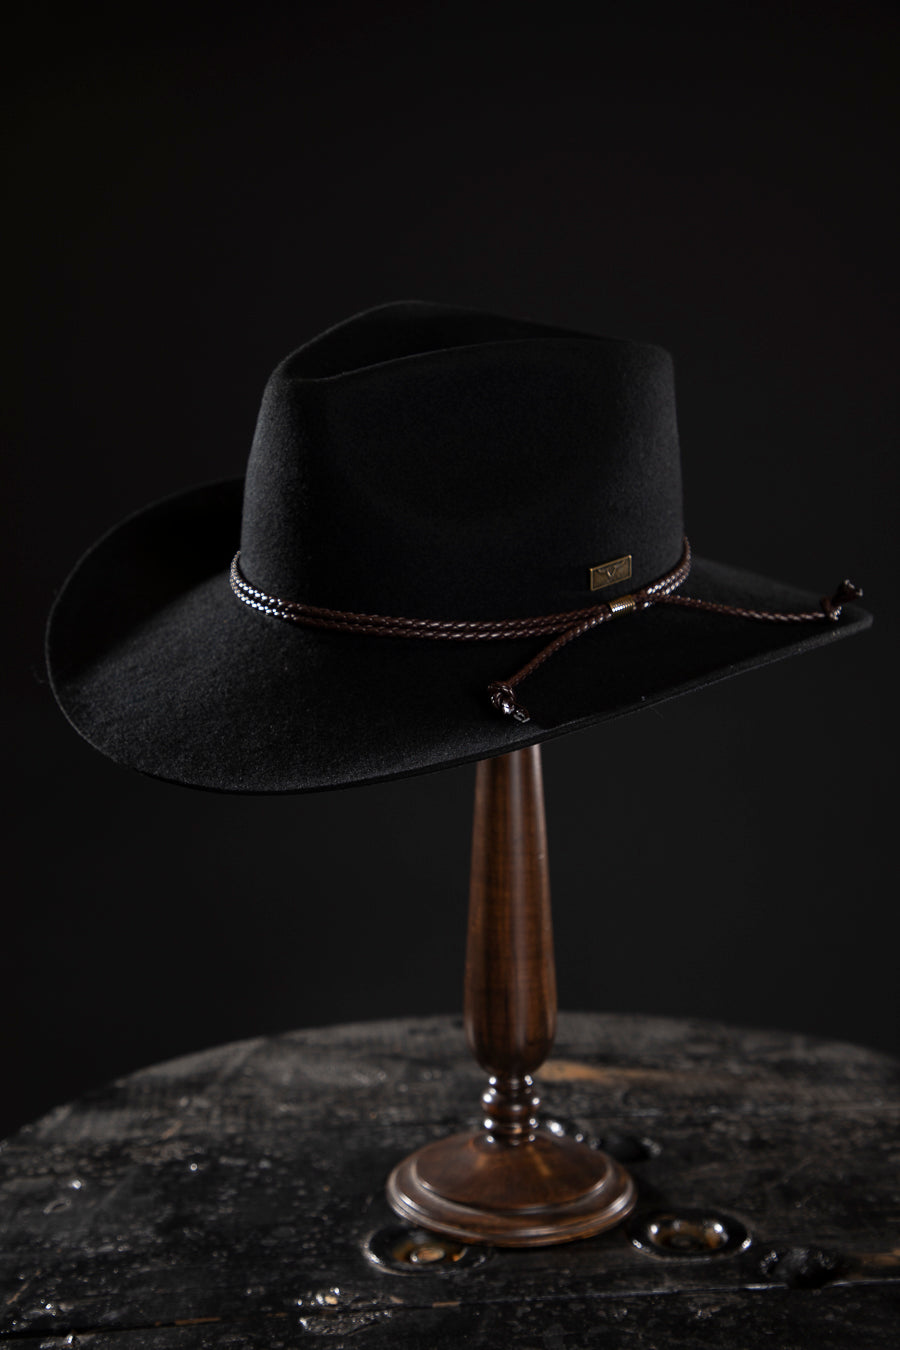 Flinders Rancher Outback Cowboy Hat - Deluxe, high quality hats for men and women. Our collection of hats including wool felt top hats, fedoras, bowlers, caps, fedoras, trilbys, cloches and more are a wonderful addition to a 1920s Gangster or Gatsby costume, or the perfect fashion accessory. Shop online, or visit our Mornington hat store to see all that we have to offer.